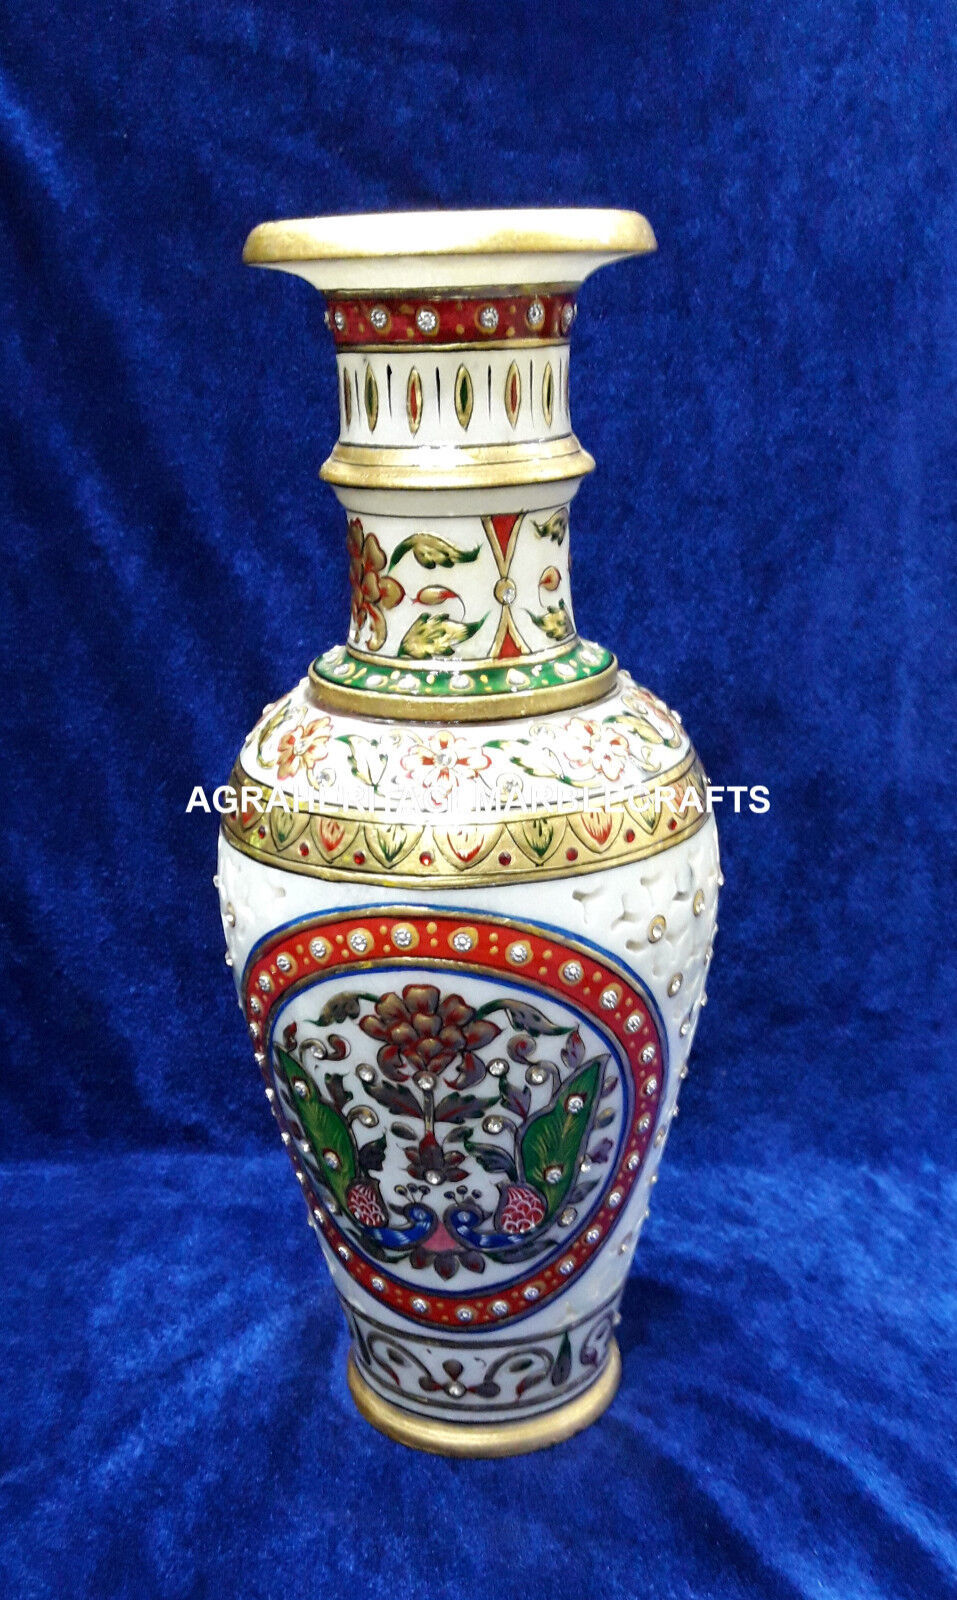 Primary image for 12" White Marble Flower Vase Meenakari Stone Creative Floral Occasion Gift H4170